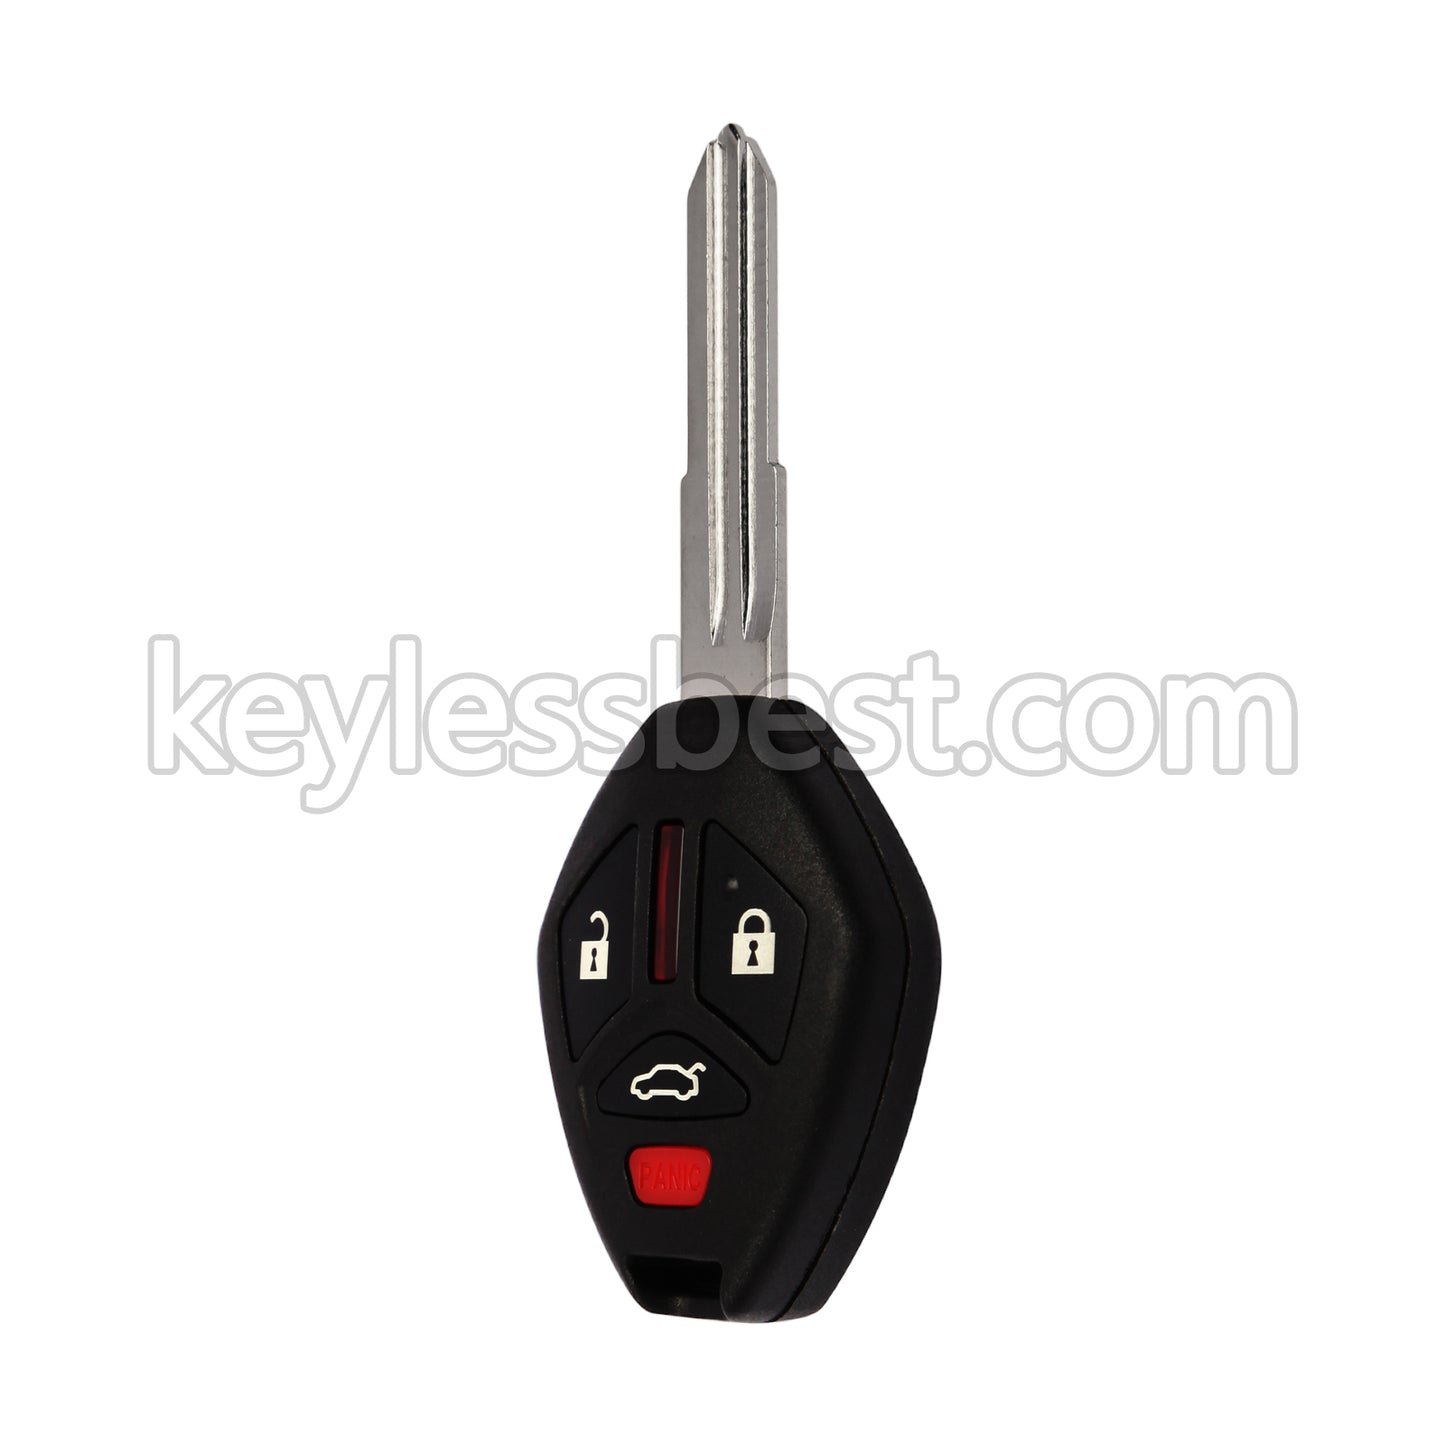 2007 - 2017 Mitsubishi I-MeiV Outlander / 4 Buttons Remote Key / OUCG8D-625M-A-HF / 315MHz